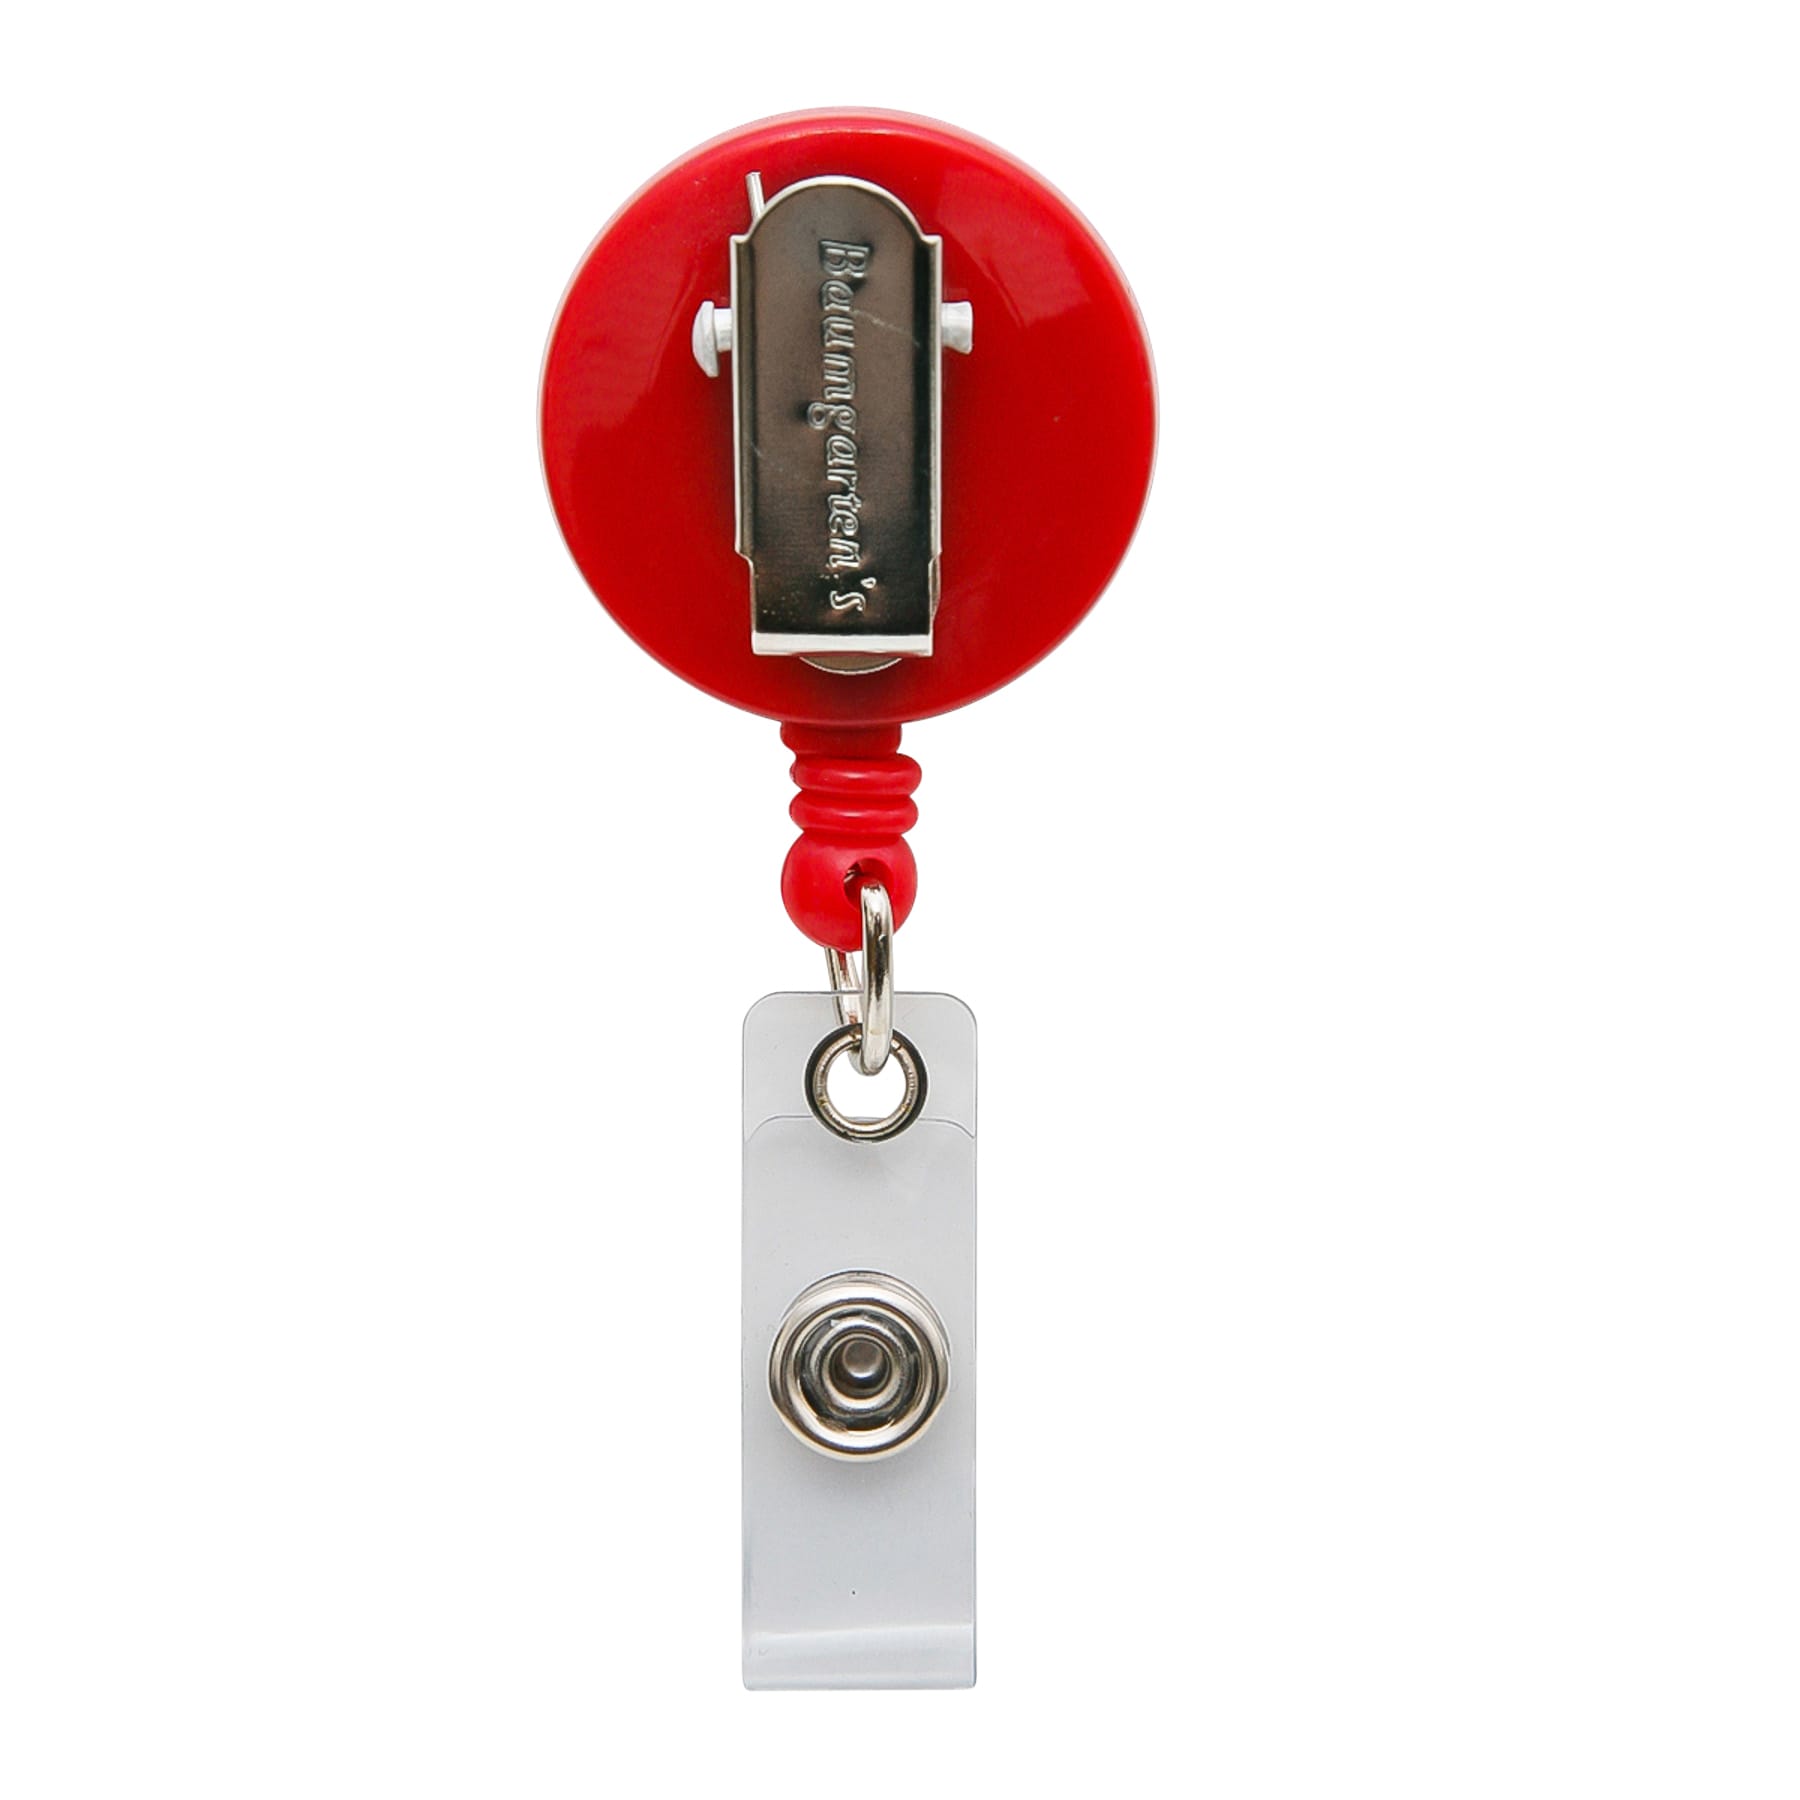 Round Badge Reels: Stylish & Secure ID Holders for Every Occasion